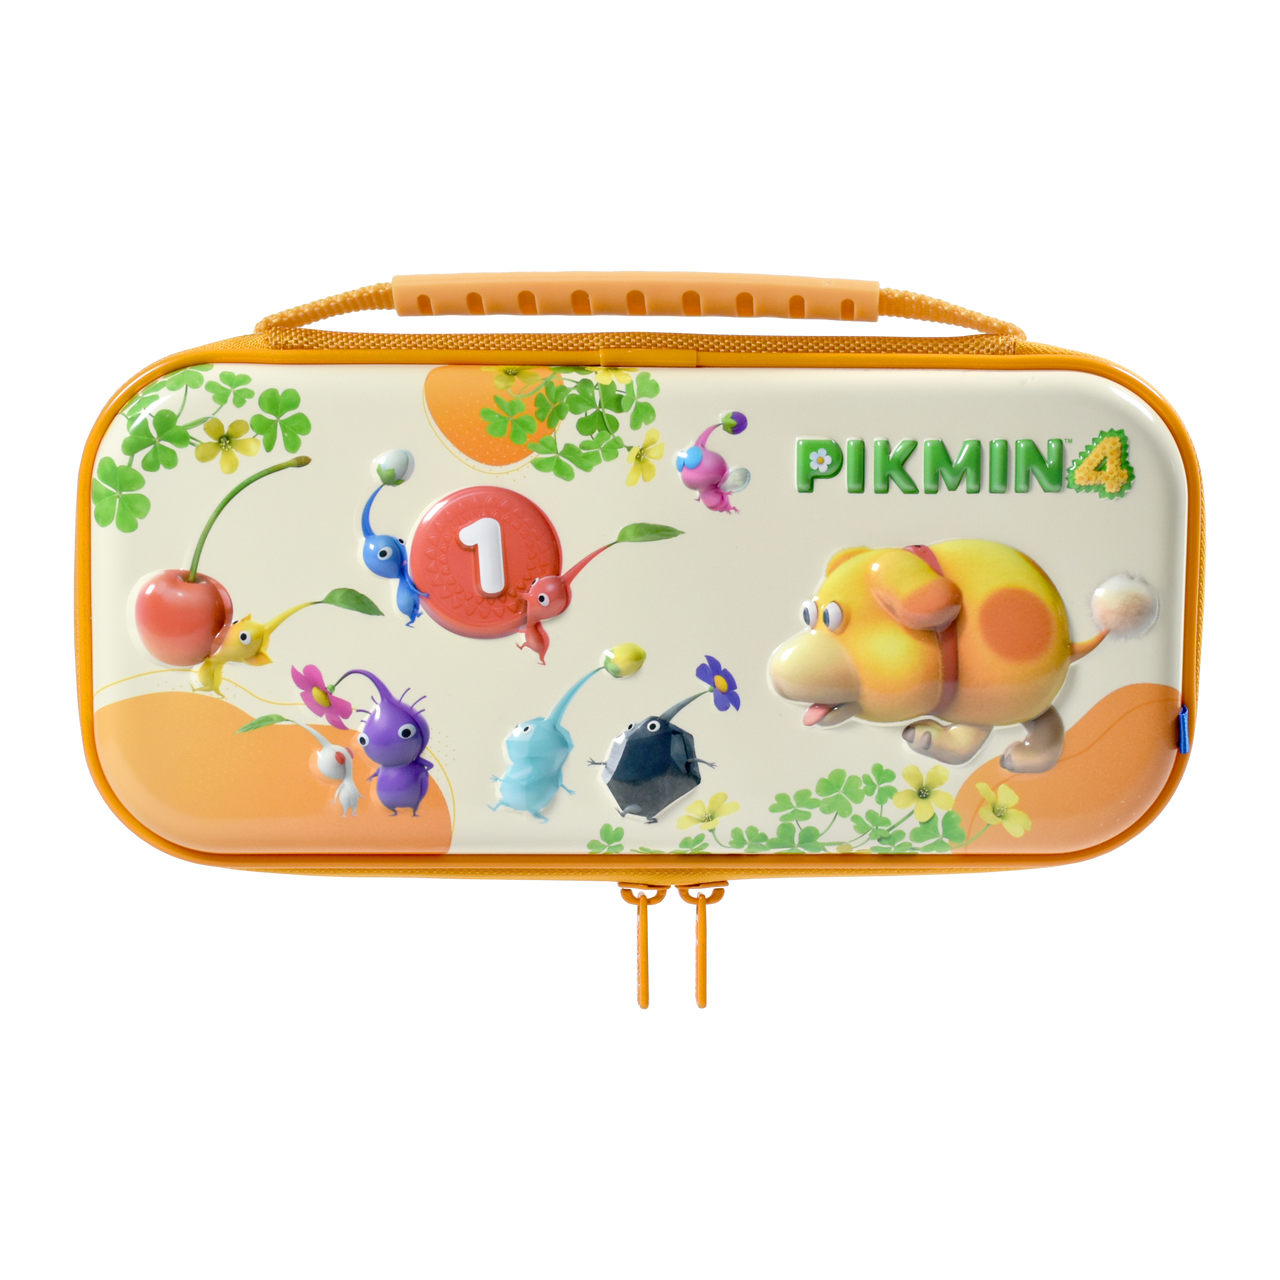 Pikmin 4 - Nintendo Switch for sale online